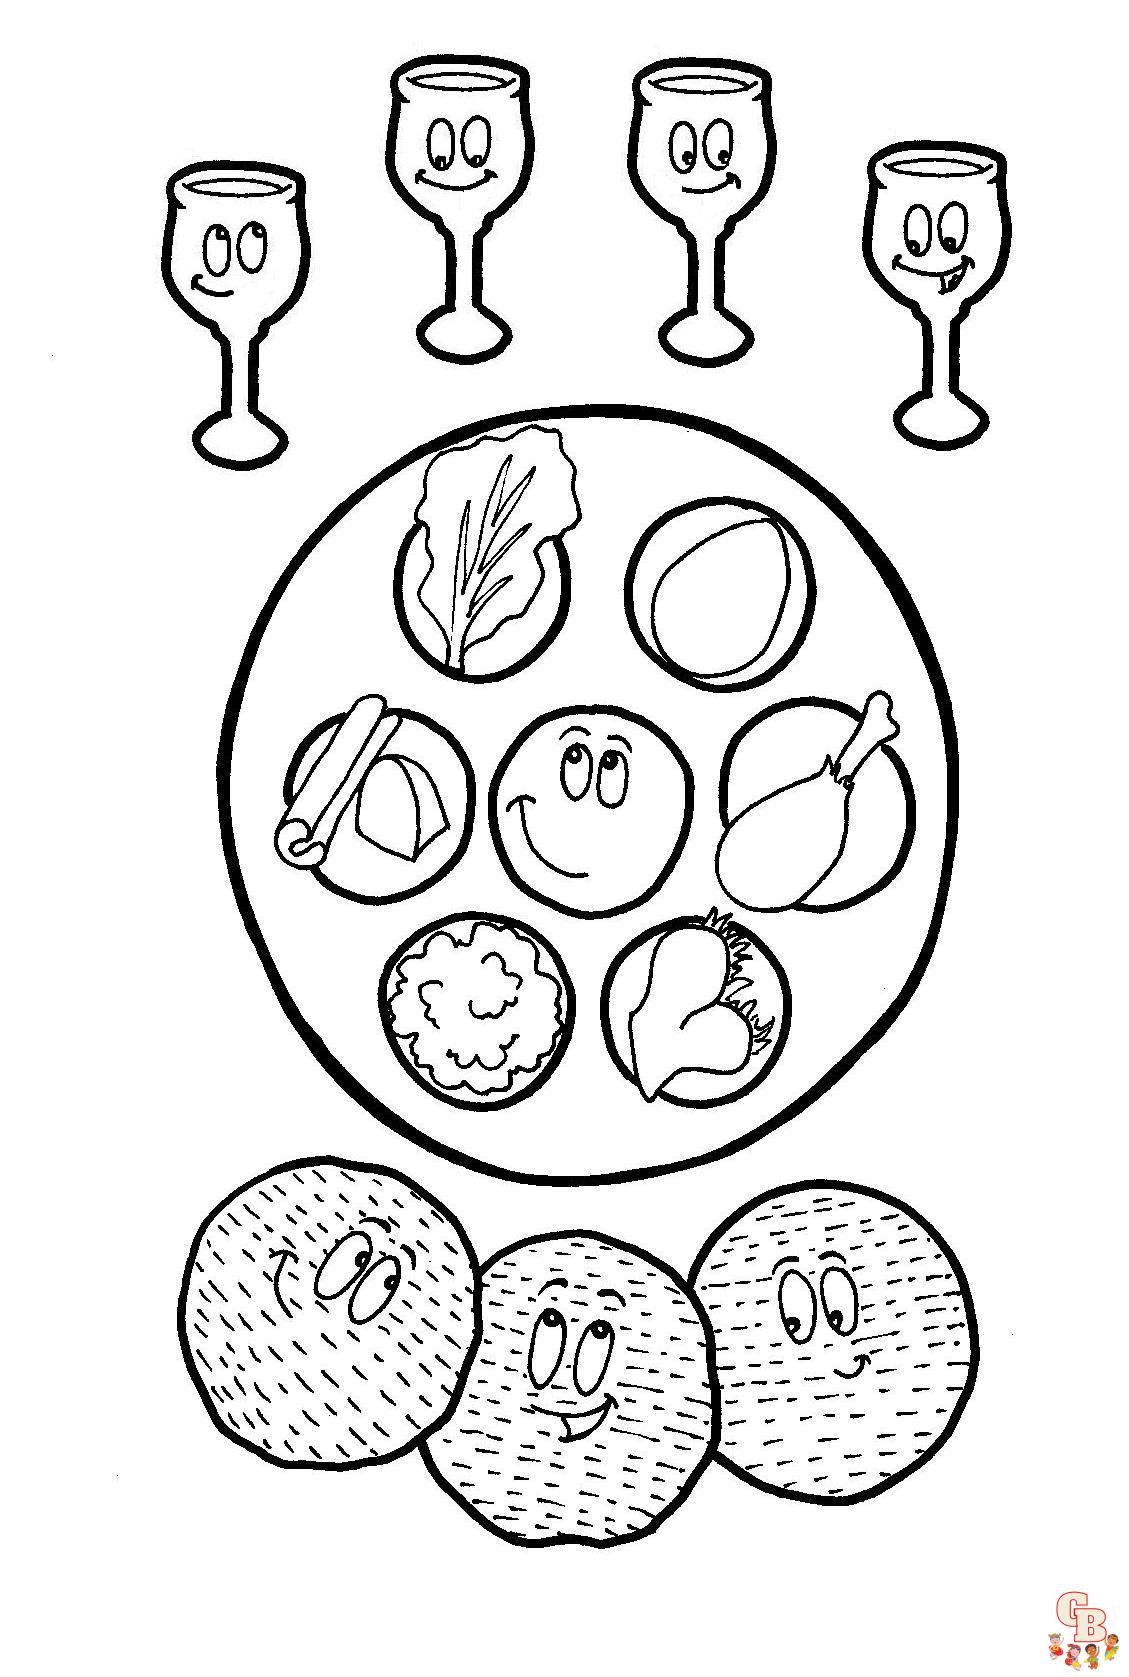 passover story coloring pages